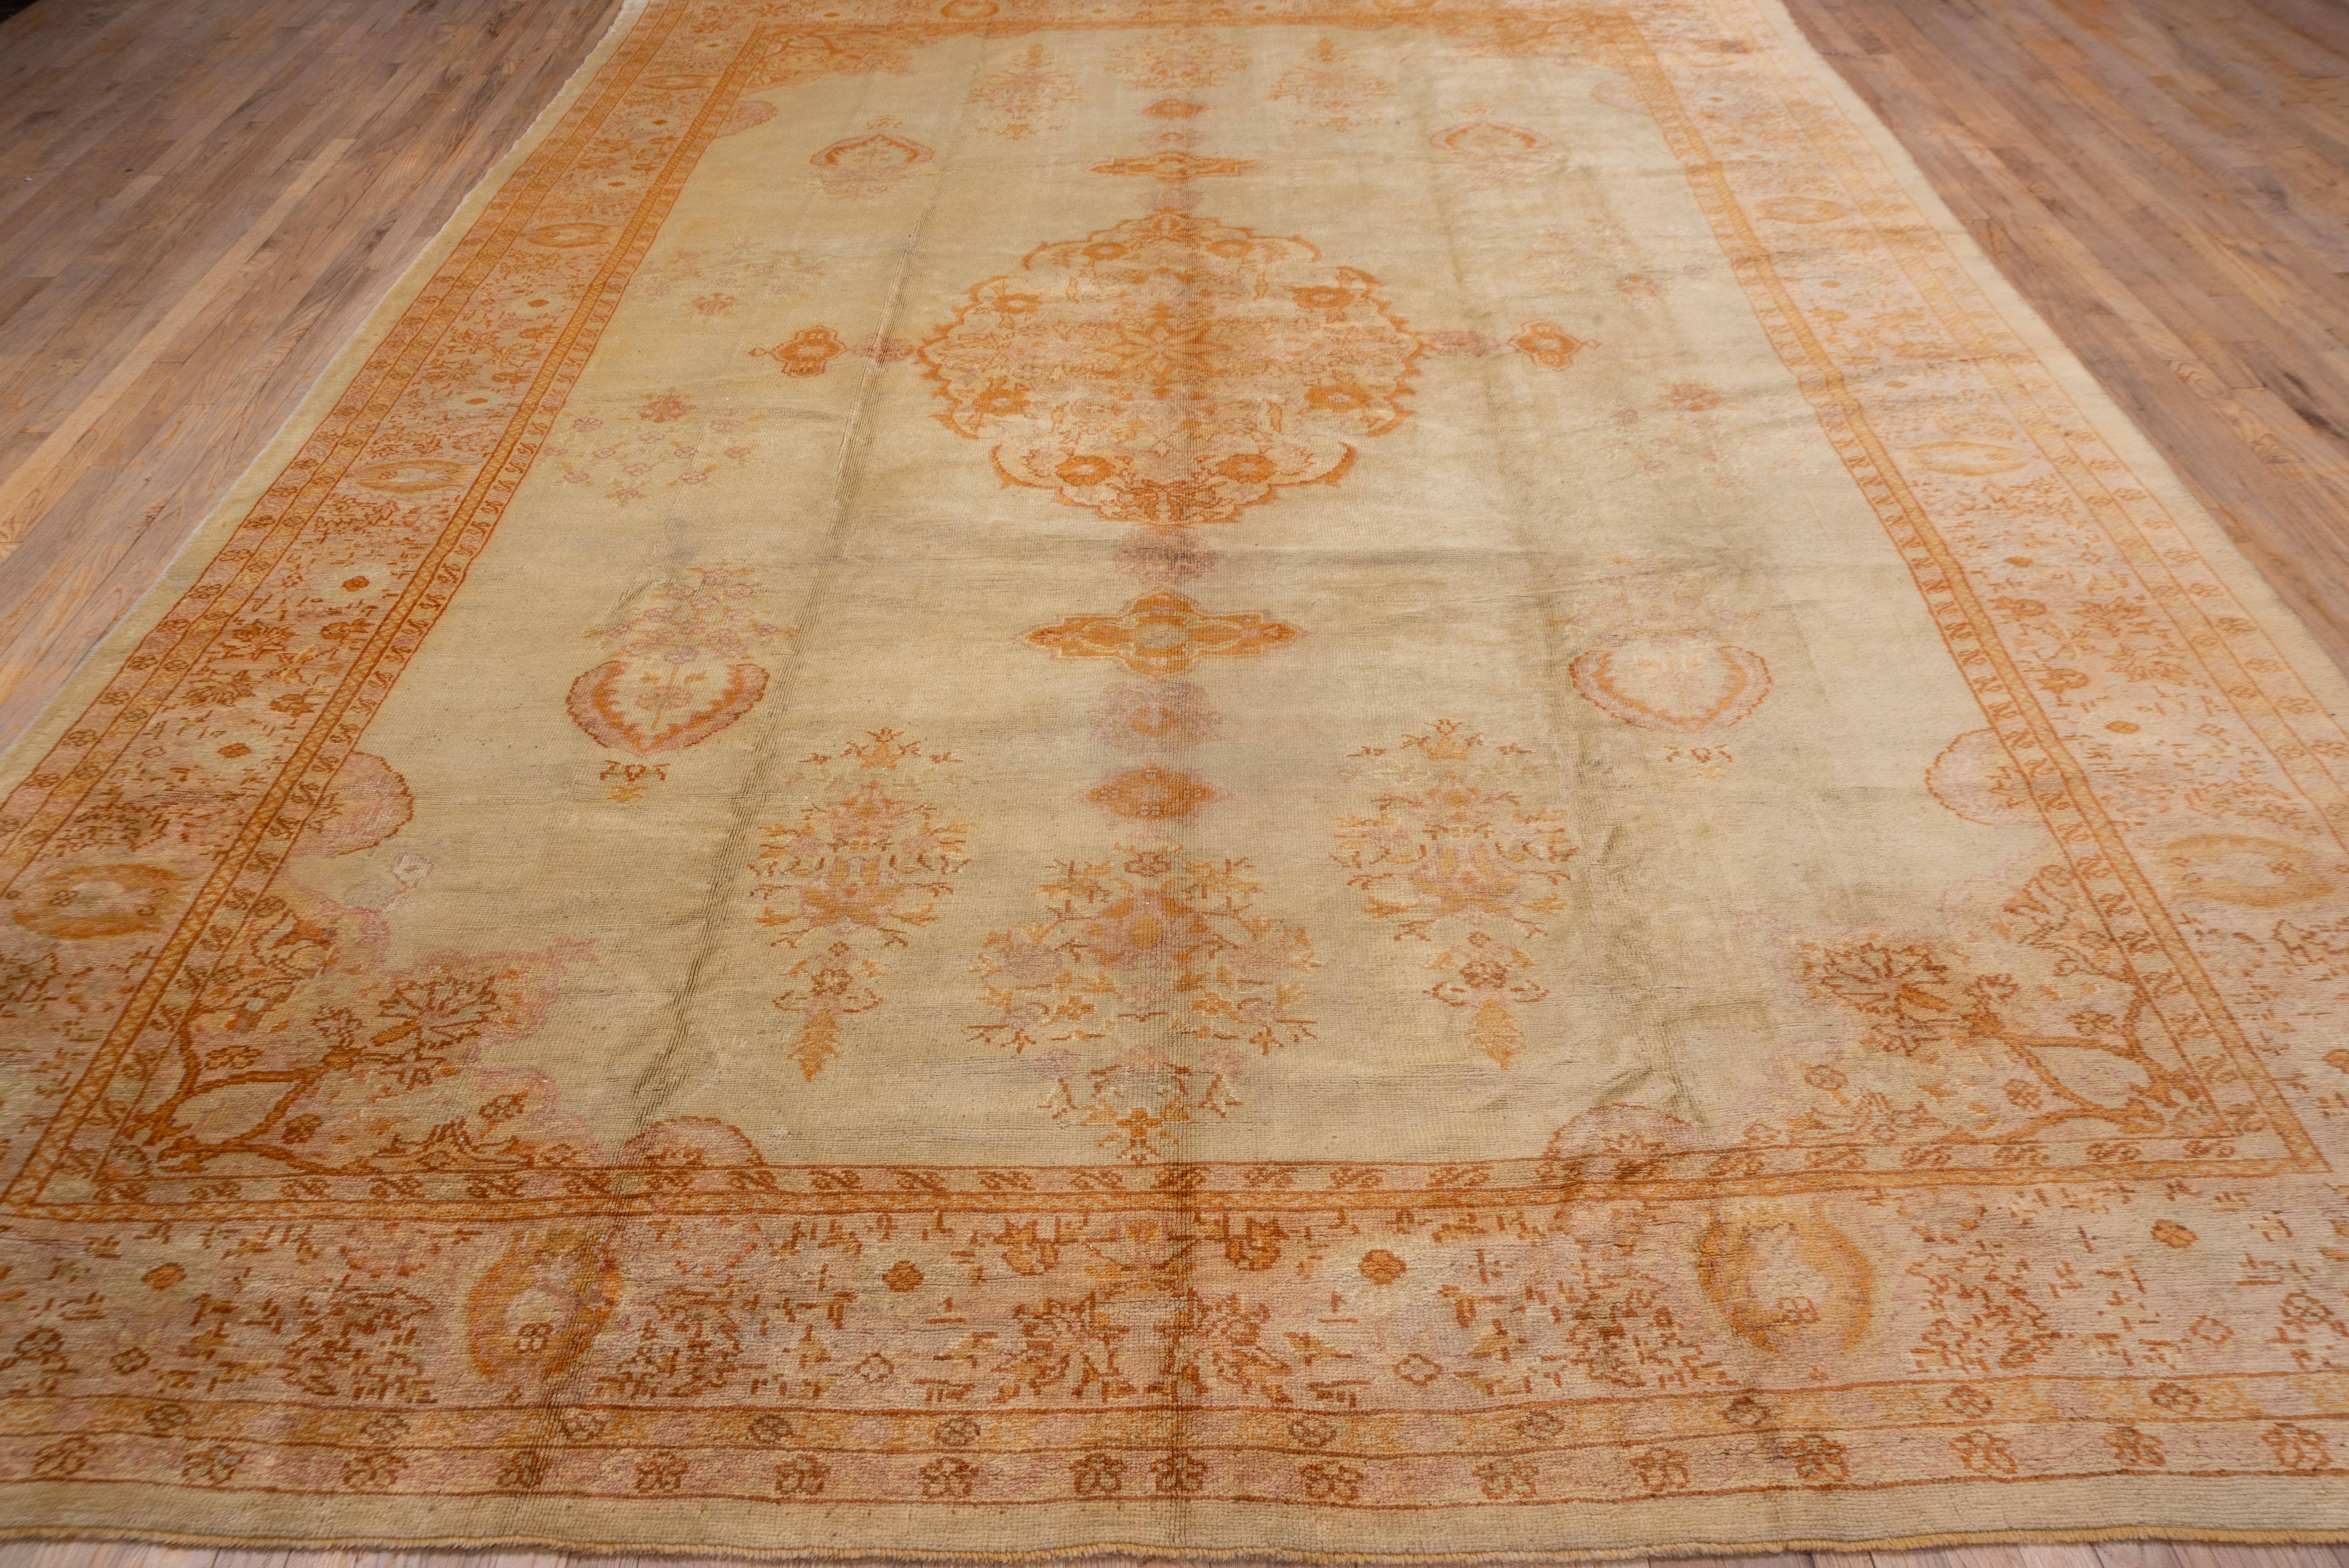 Antique Turkish Oushak Rug, Ecru Field, Center Medallion, Orange & Pink Accents In Good Condition For Sale In New York, NY